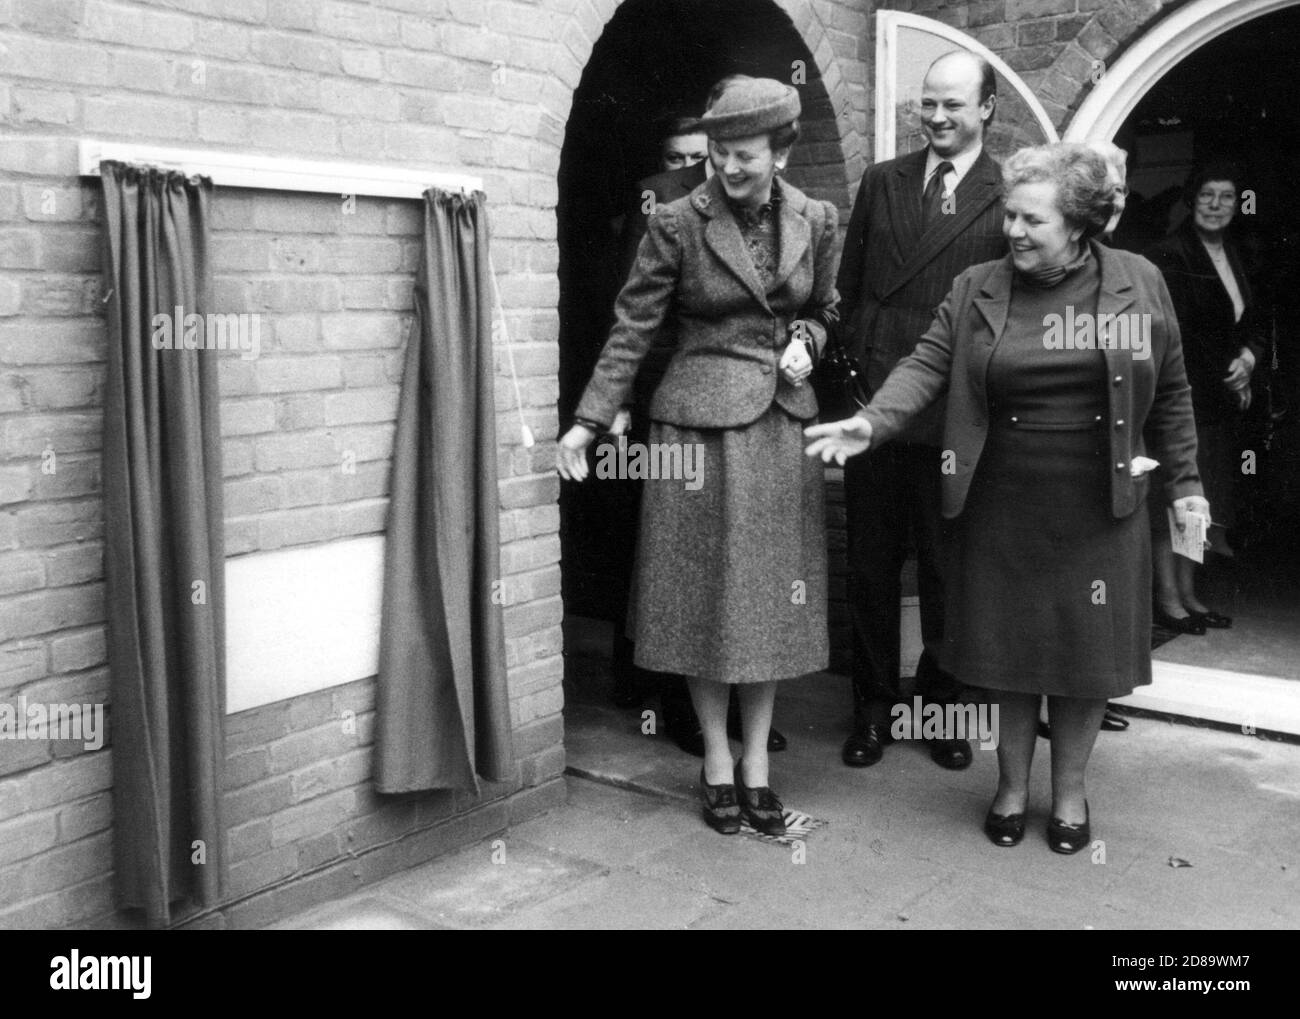 HER MAJESTY THE QUEEN OF DENMARK, QUEEN MARGARETHE II UNVEILS THE FOUNDATION STONE OF THE NEW MUSIC ROOM AT NORTH FORELAND LODGE SHERFIELD ON LODDEN, ENGLAND WATCHED BY HEADMISTRESS MISS ROSEMARY IRVINE. 1983 Stock Photo